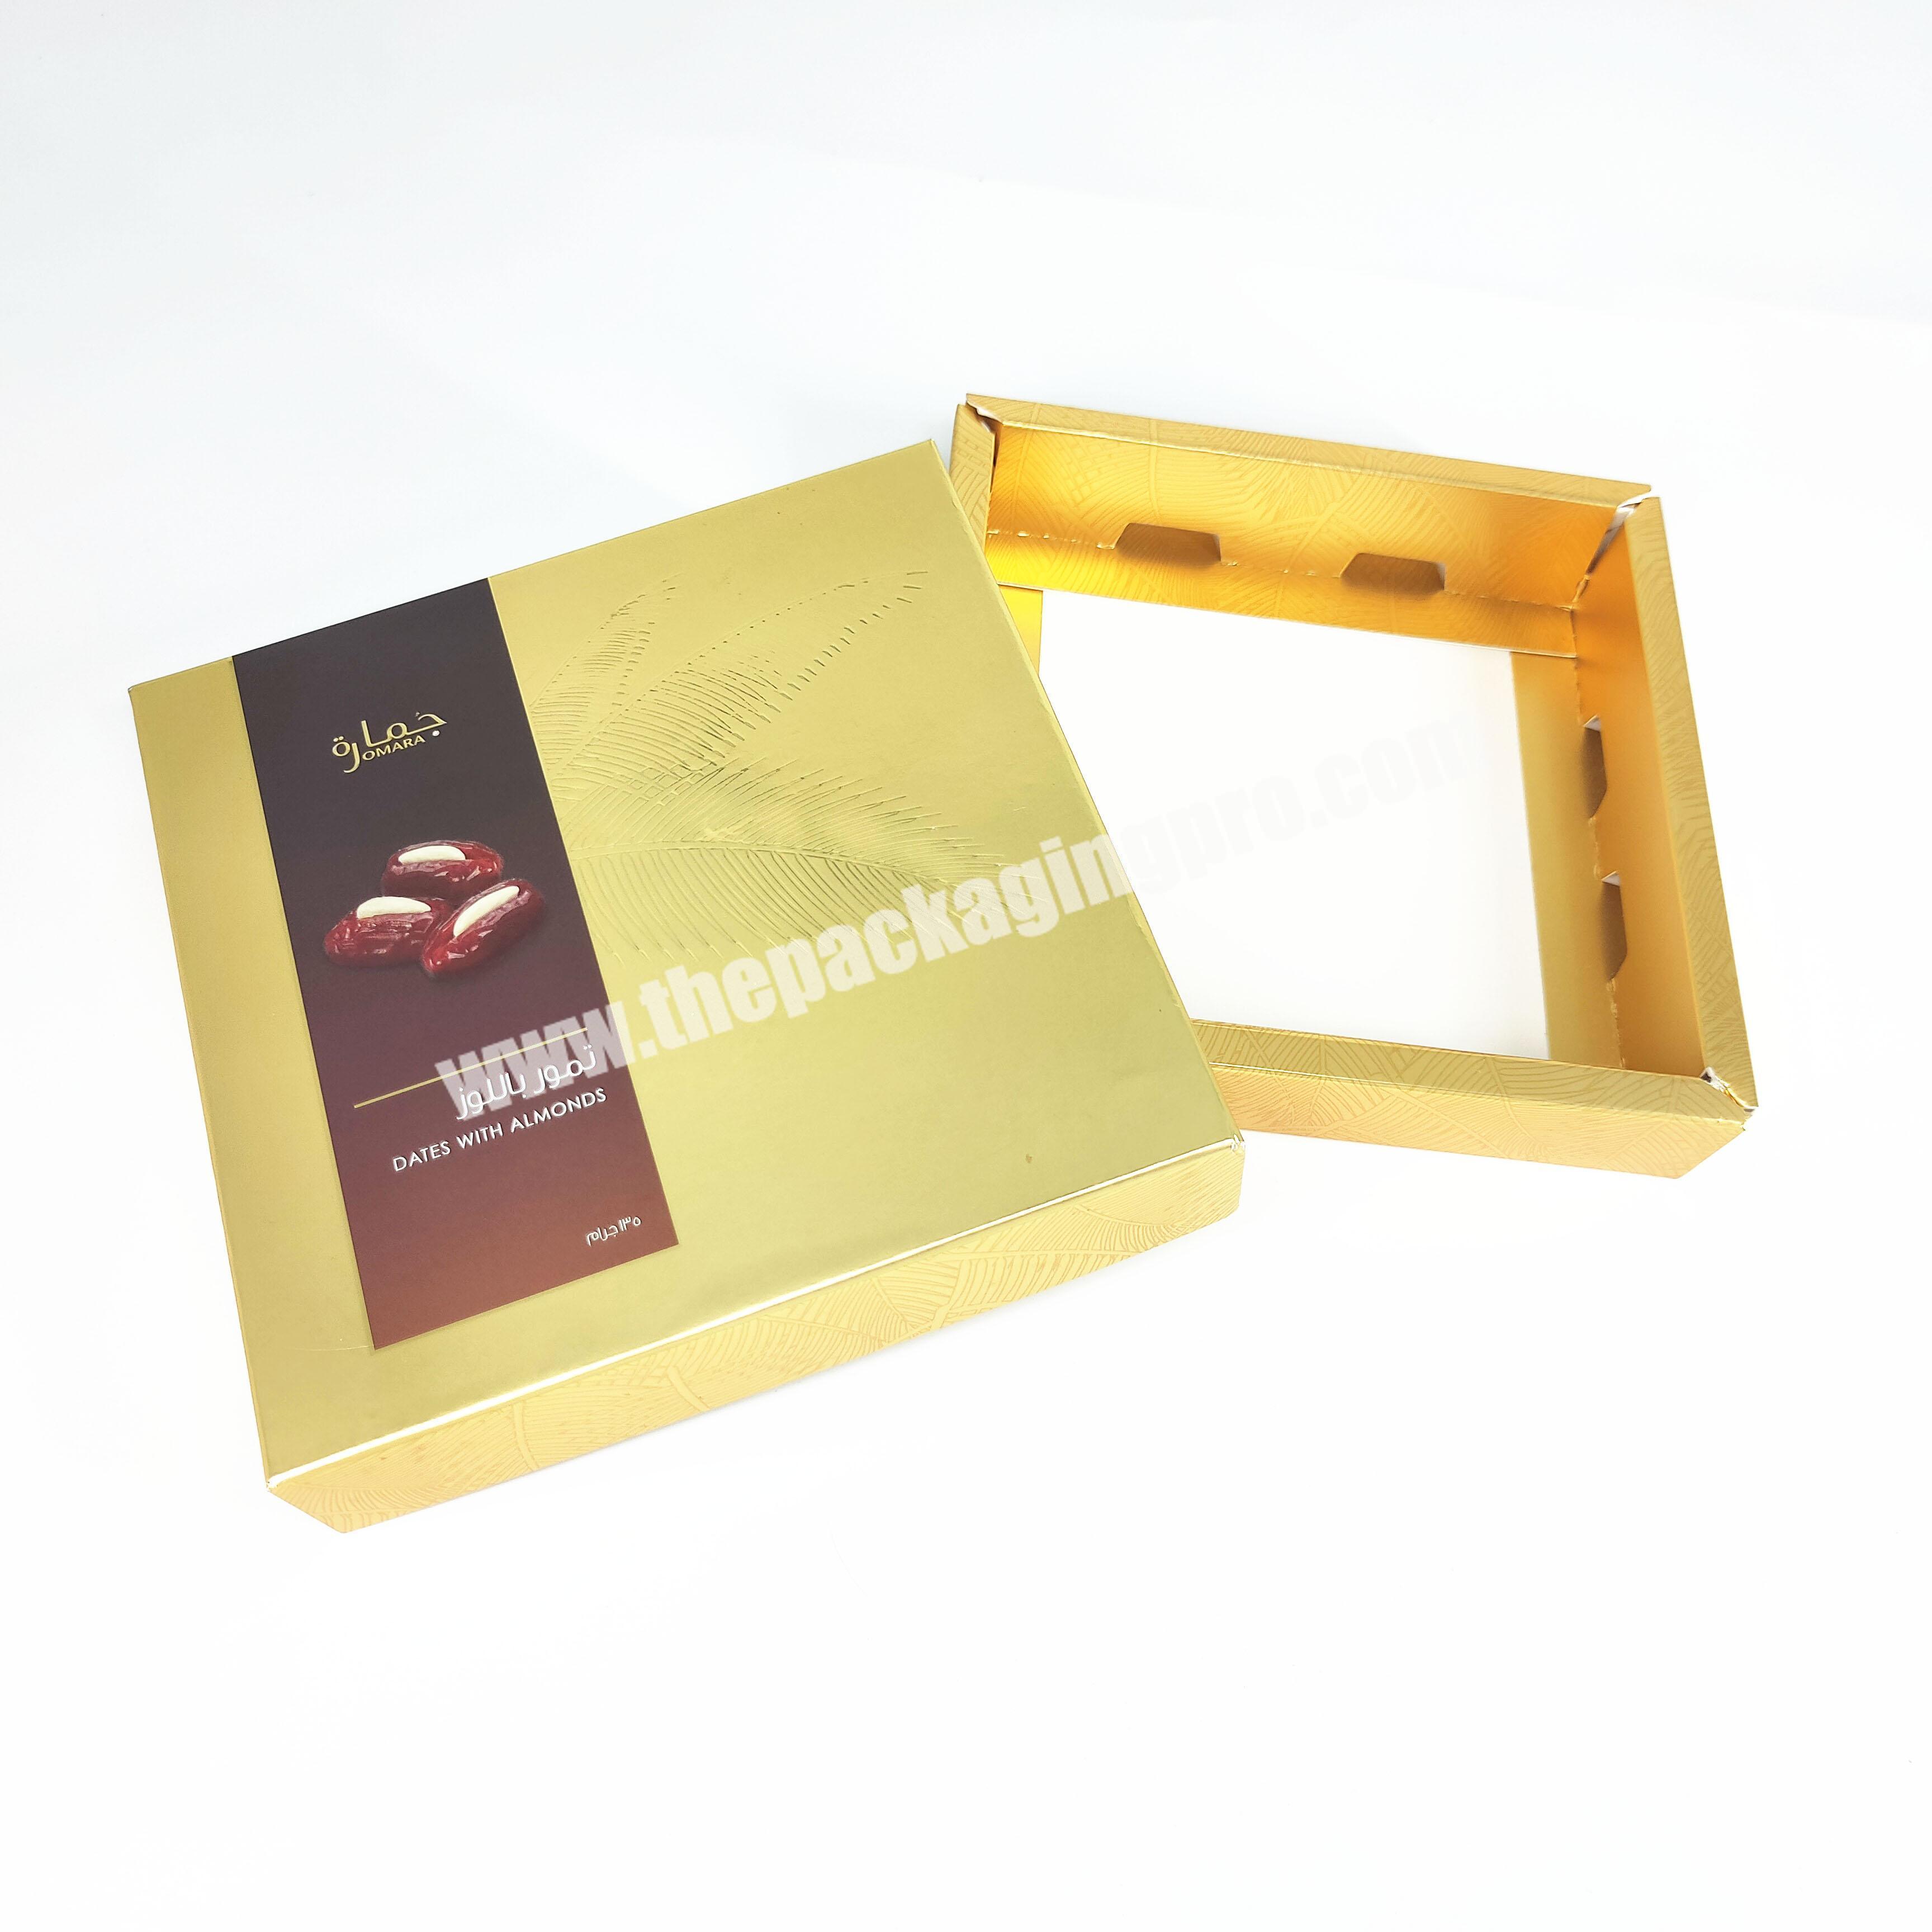 High quality golden yellow floral slip cover cake and pastry packaging gift box